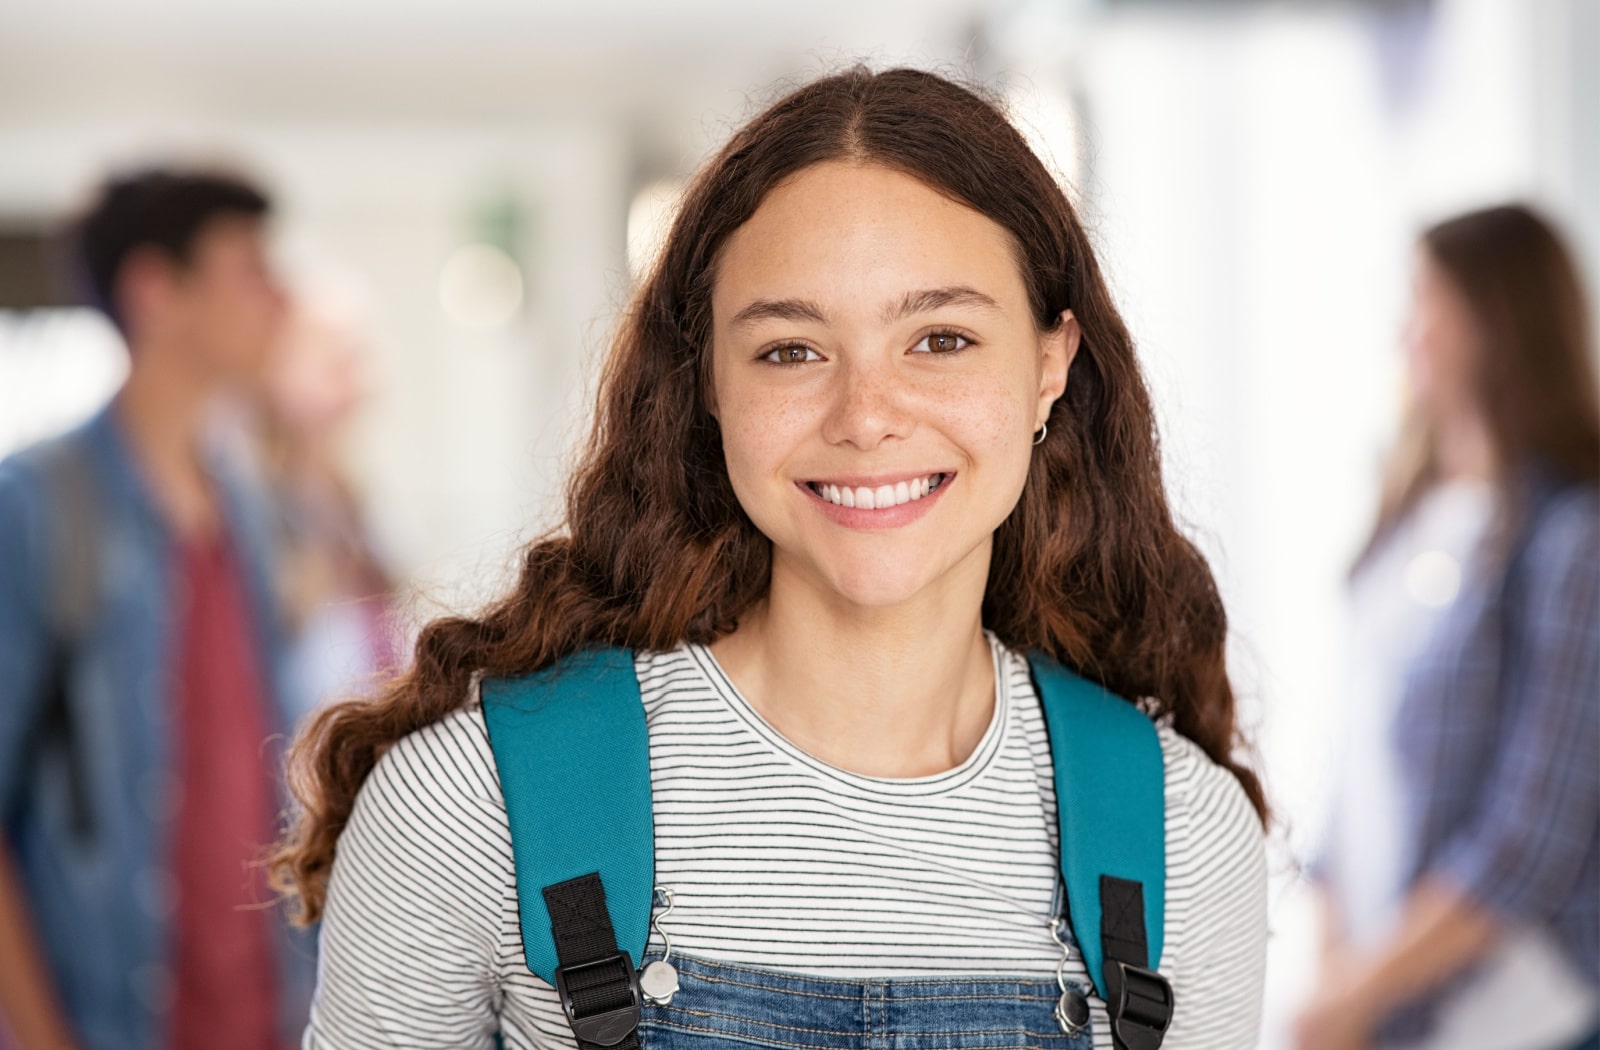 A teenage girl wearing a backpack smiles at the camera